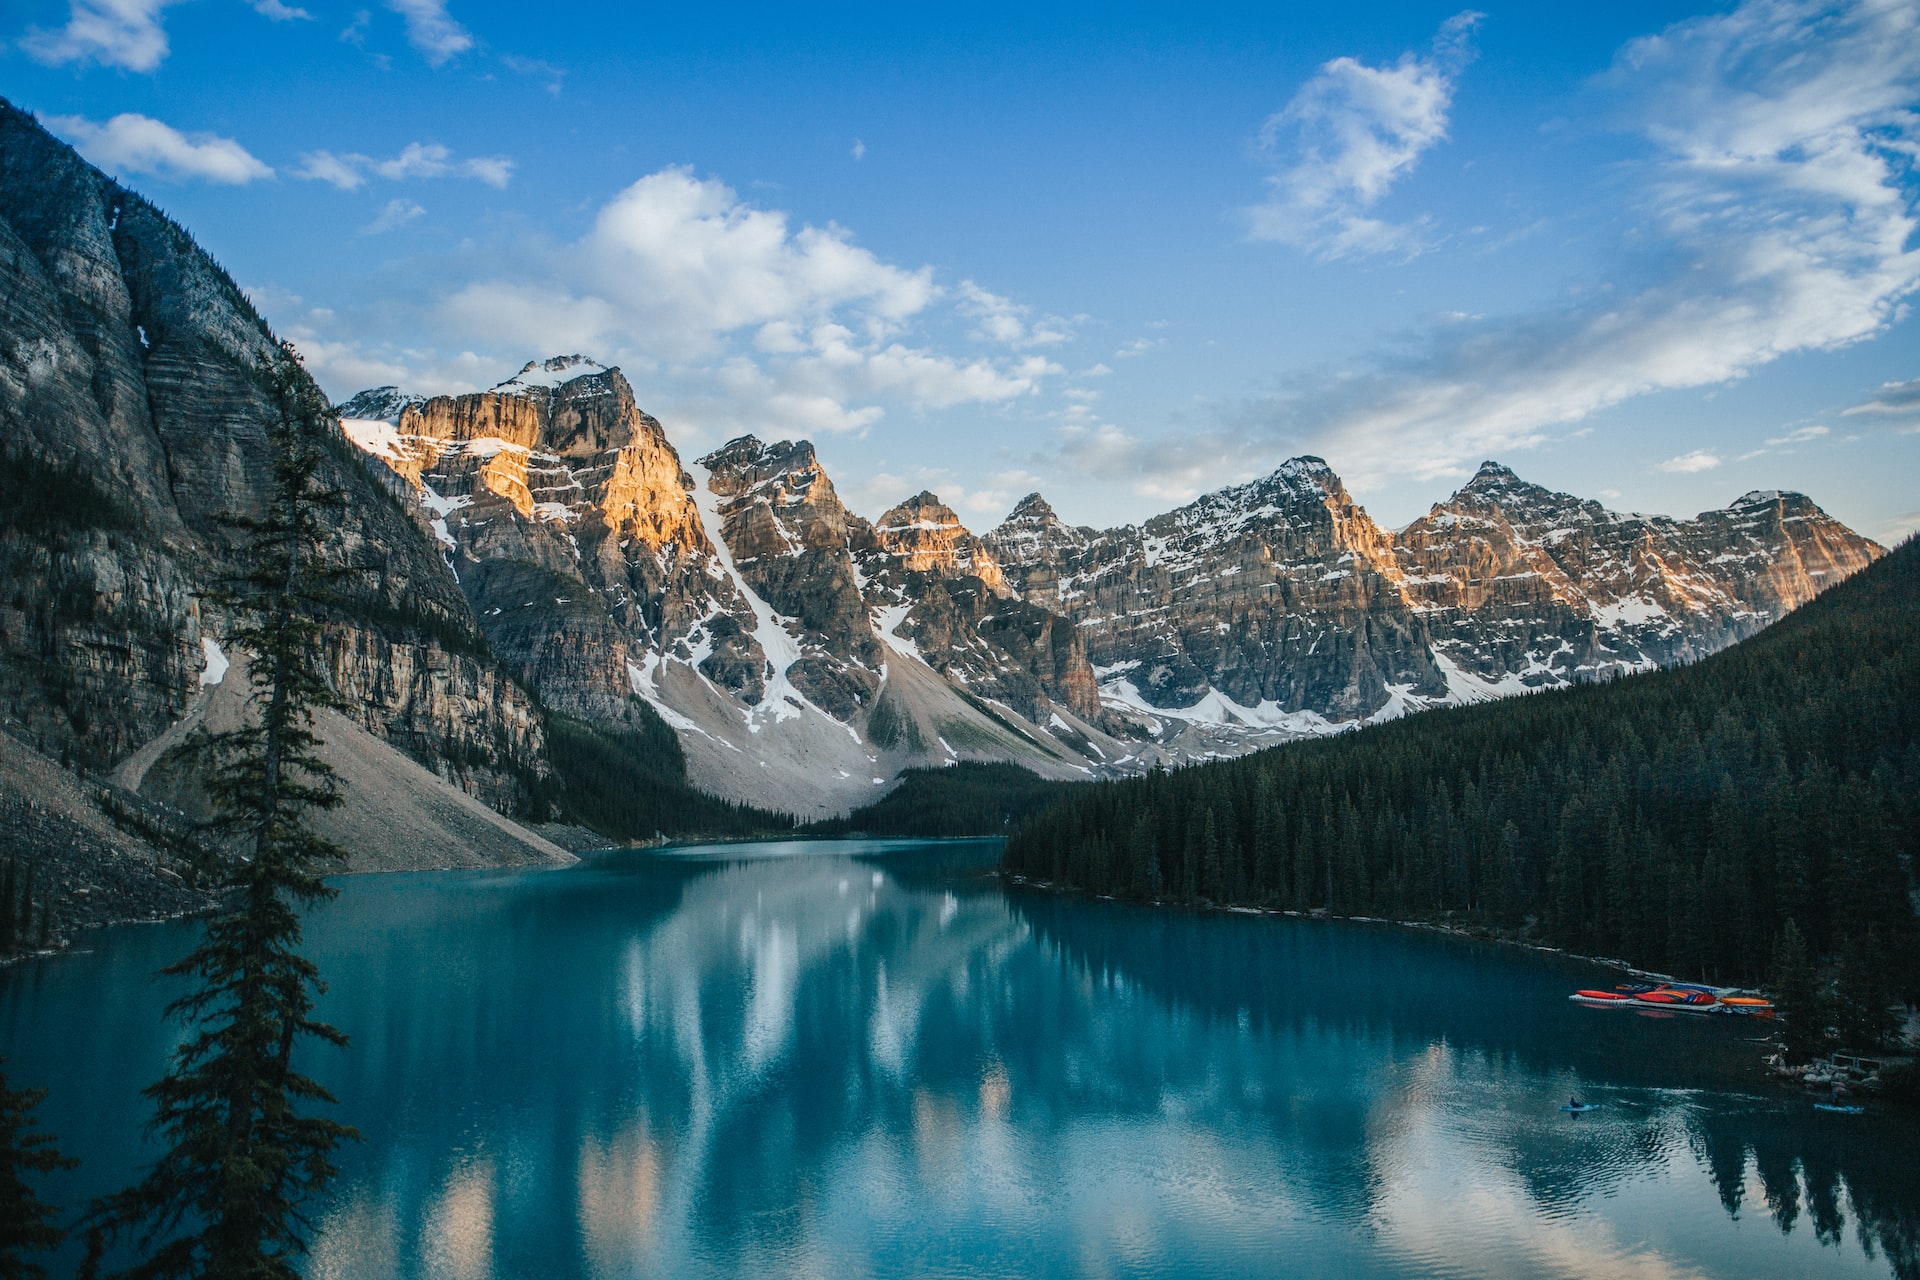 The jaw-dropping scenery of Moraine Lake in Banff, Canada.